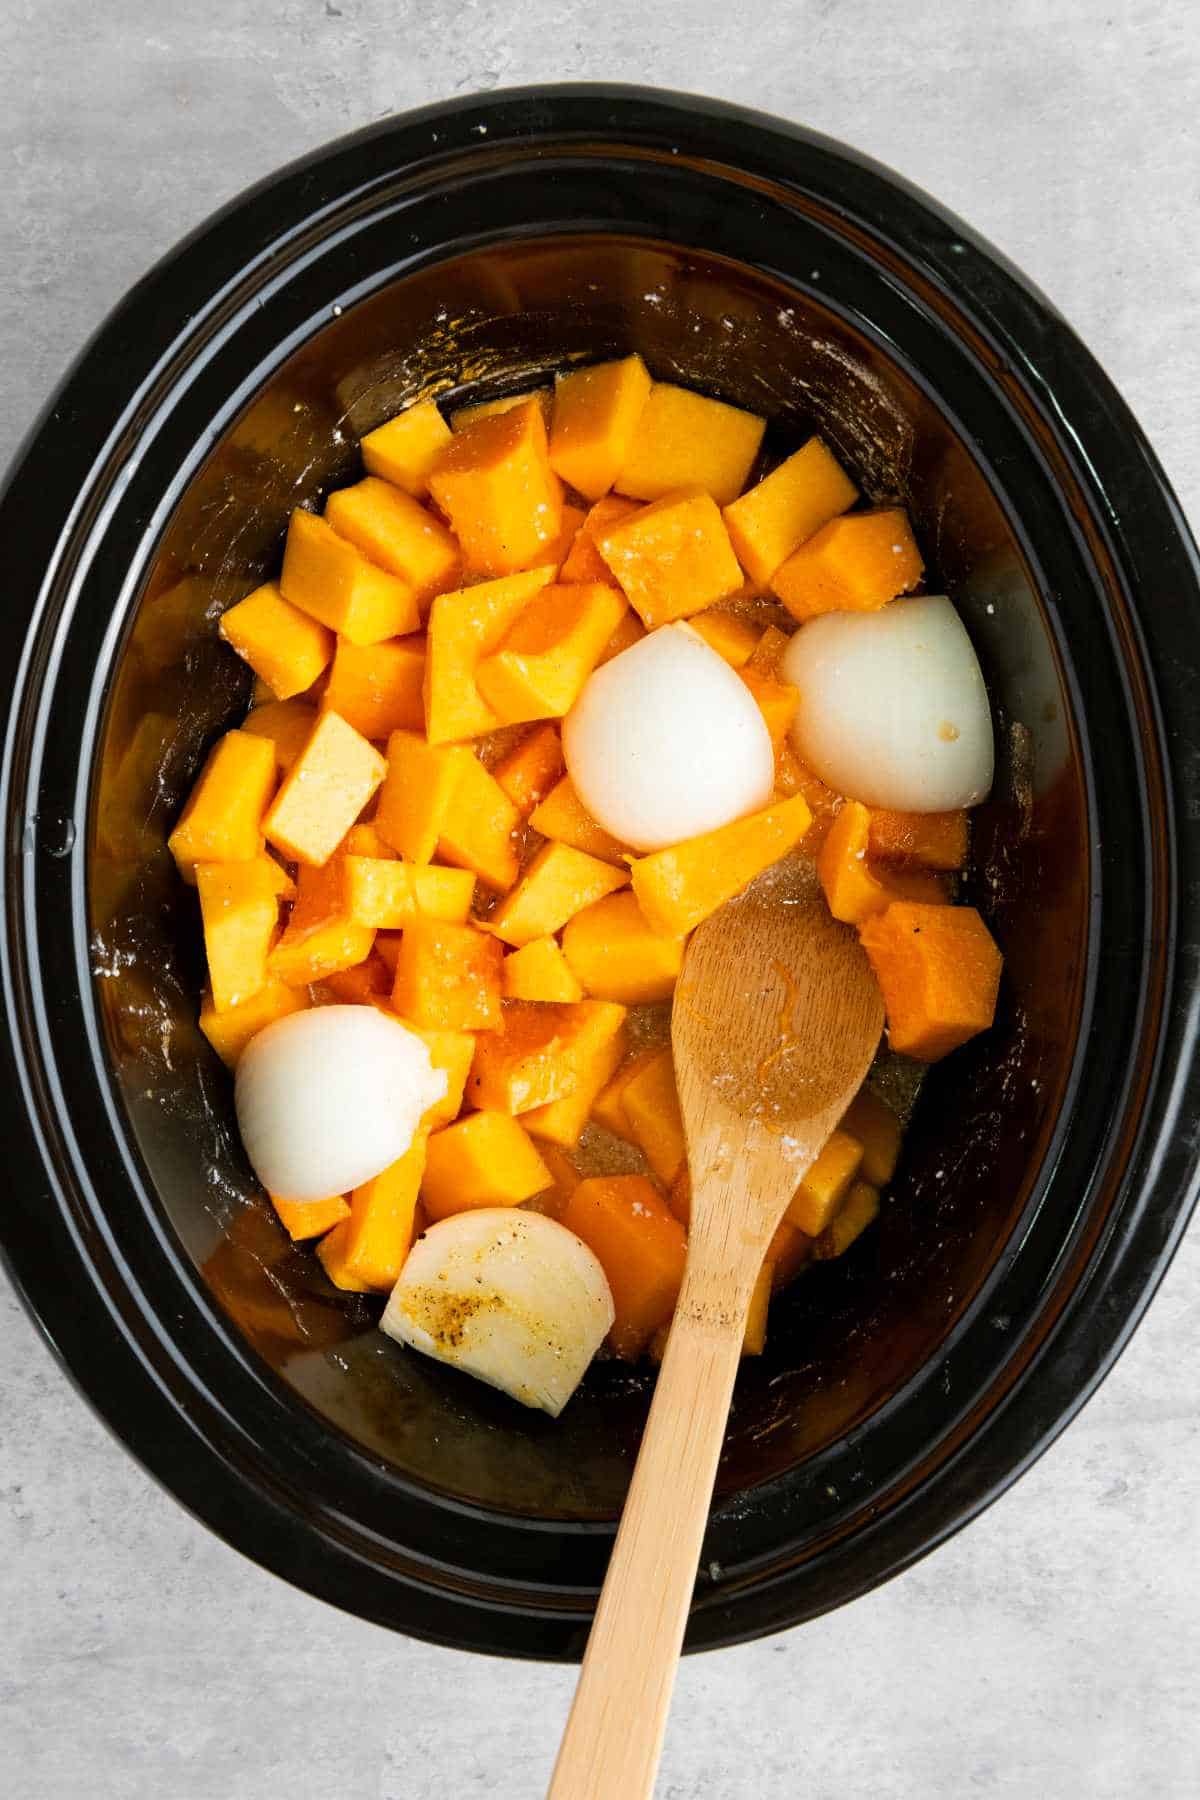 broth added to slow cooker with orange vegetables.